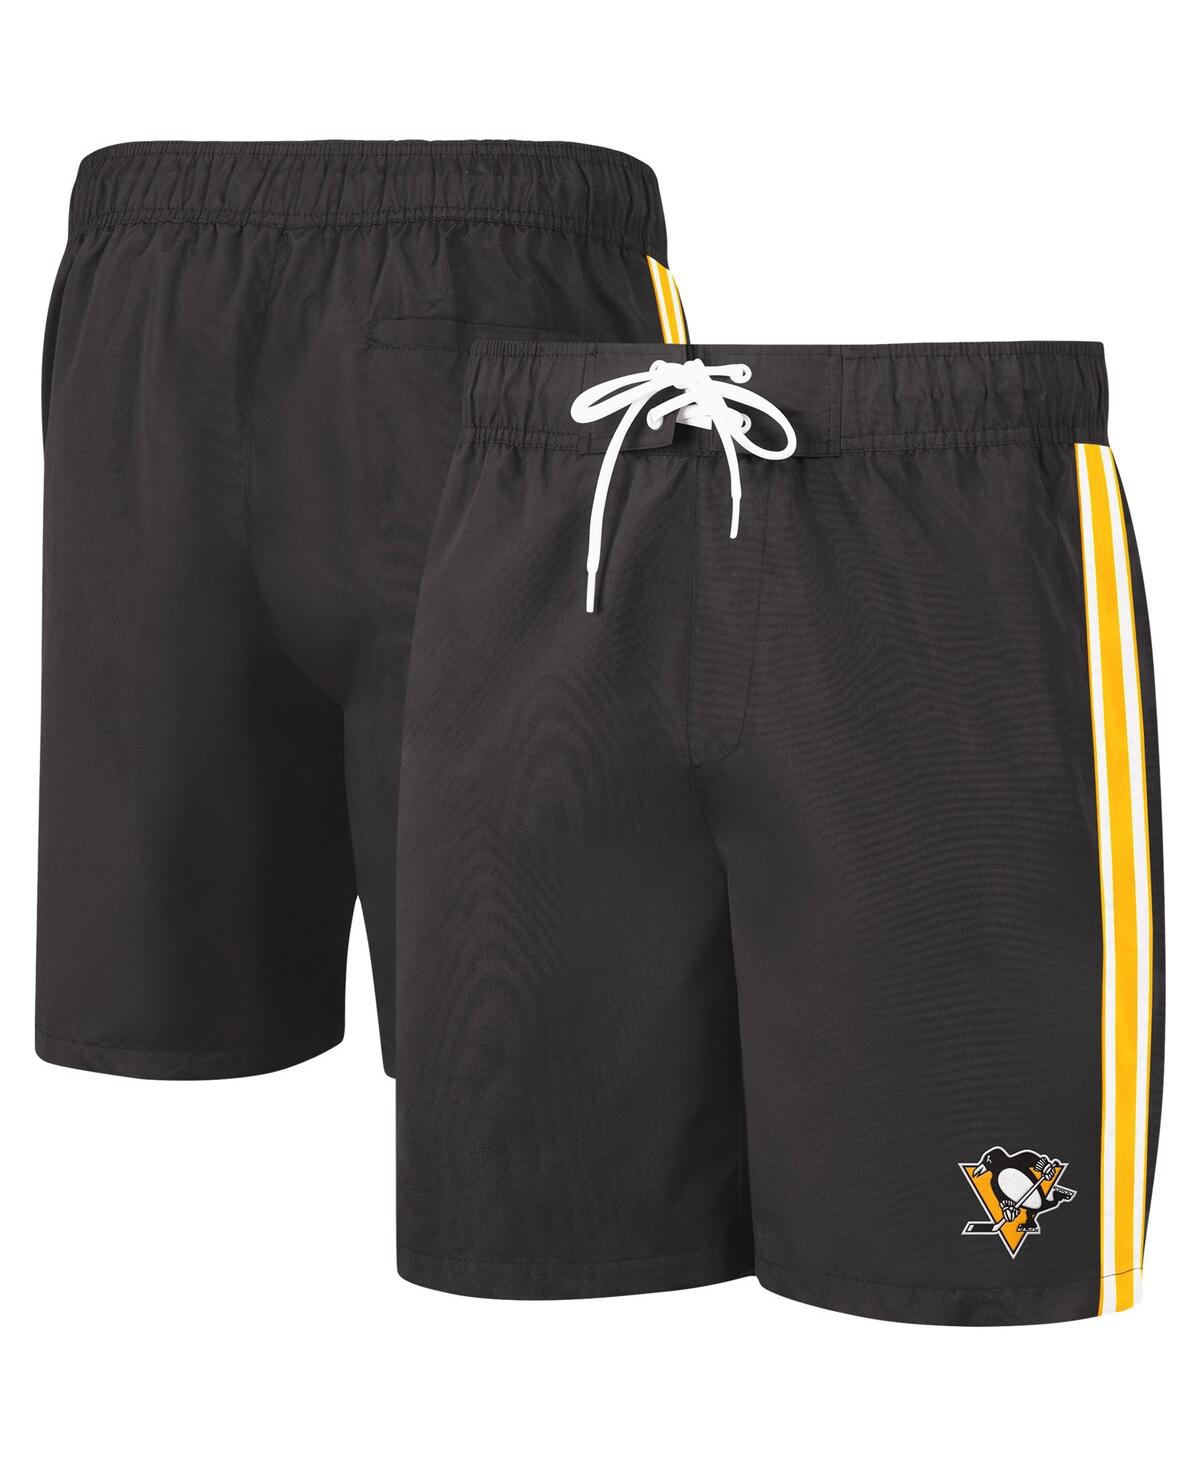 Men's G-iii Sports by Carl Banks Black and Gold Pittsburgh Penguins Sand Beach Swim Shorts - Black, Gold